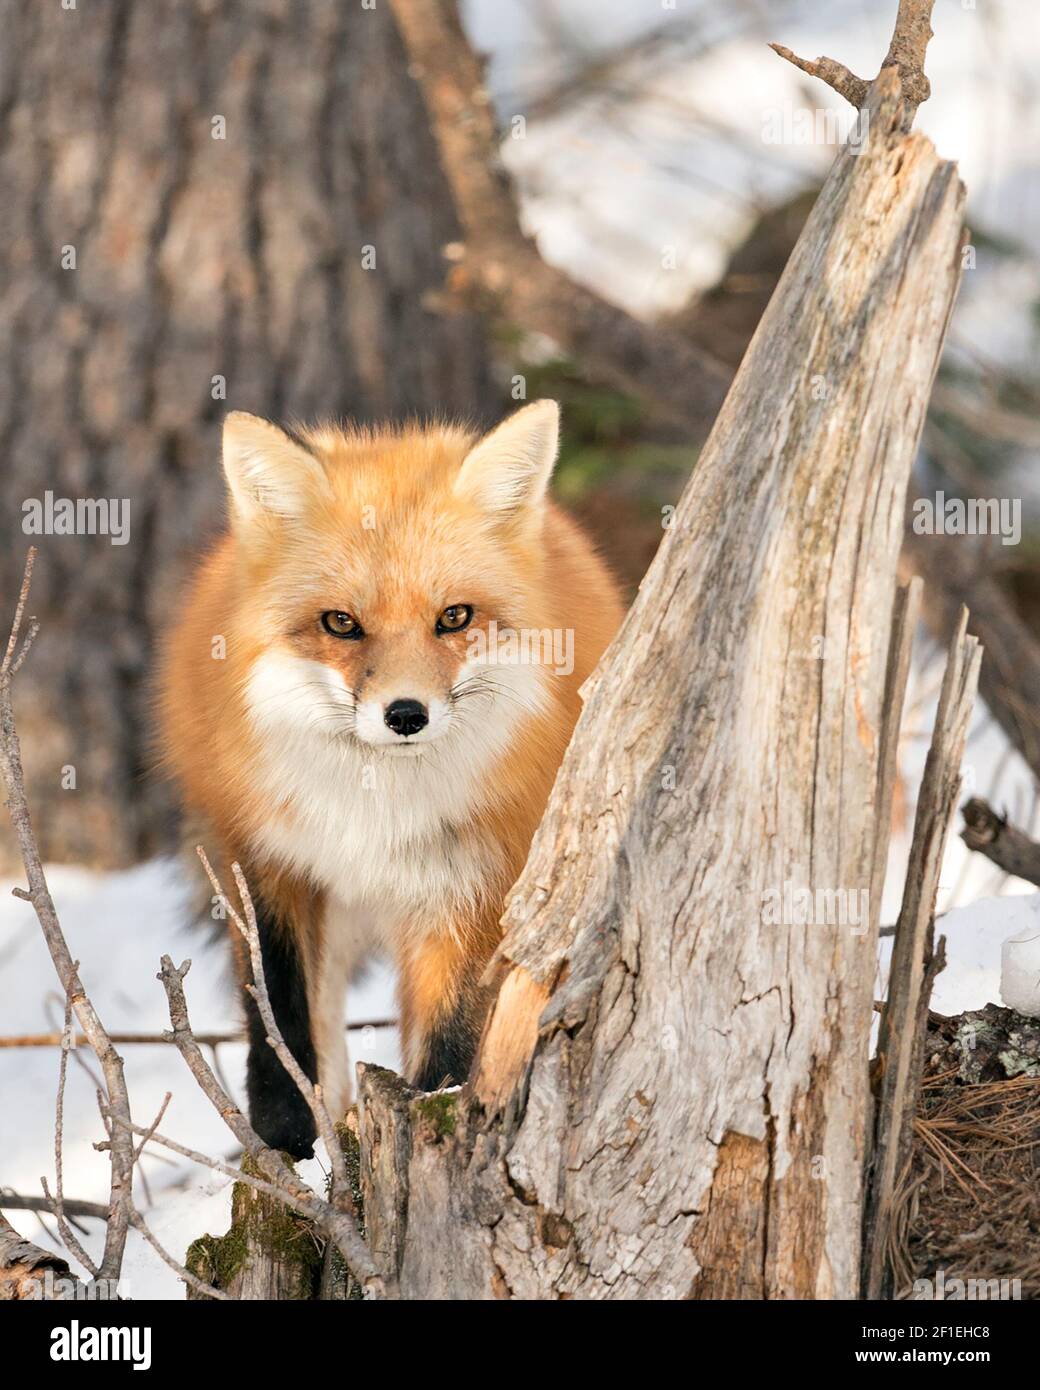 Red fox head shot close-up looking at camera in the winter season in its environment and habitat with snow forest background. Fox Image. Picture. Stock Photo